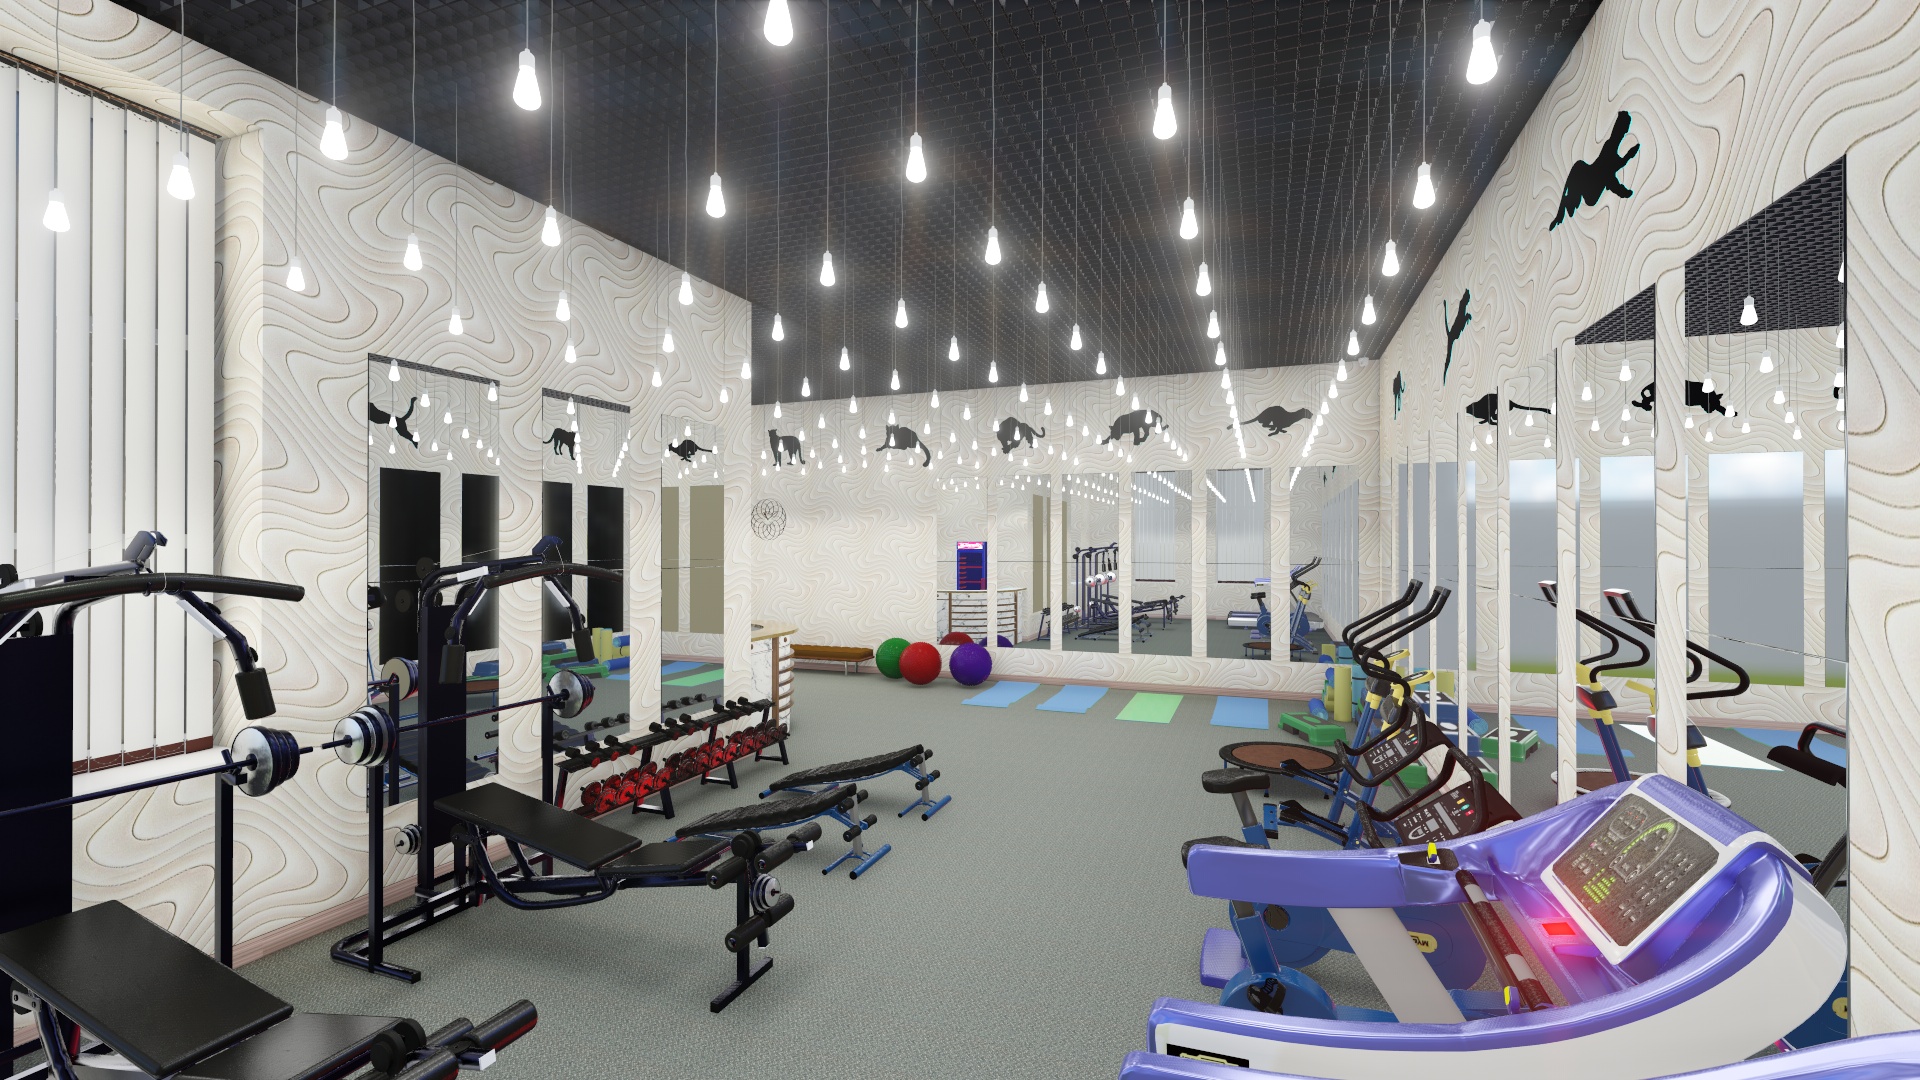 3D Video presentation of the development of the interior of the fitness club. (Video attached) in Cinema 4d Other image